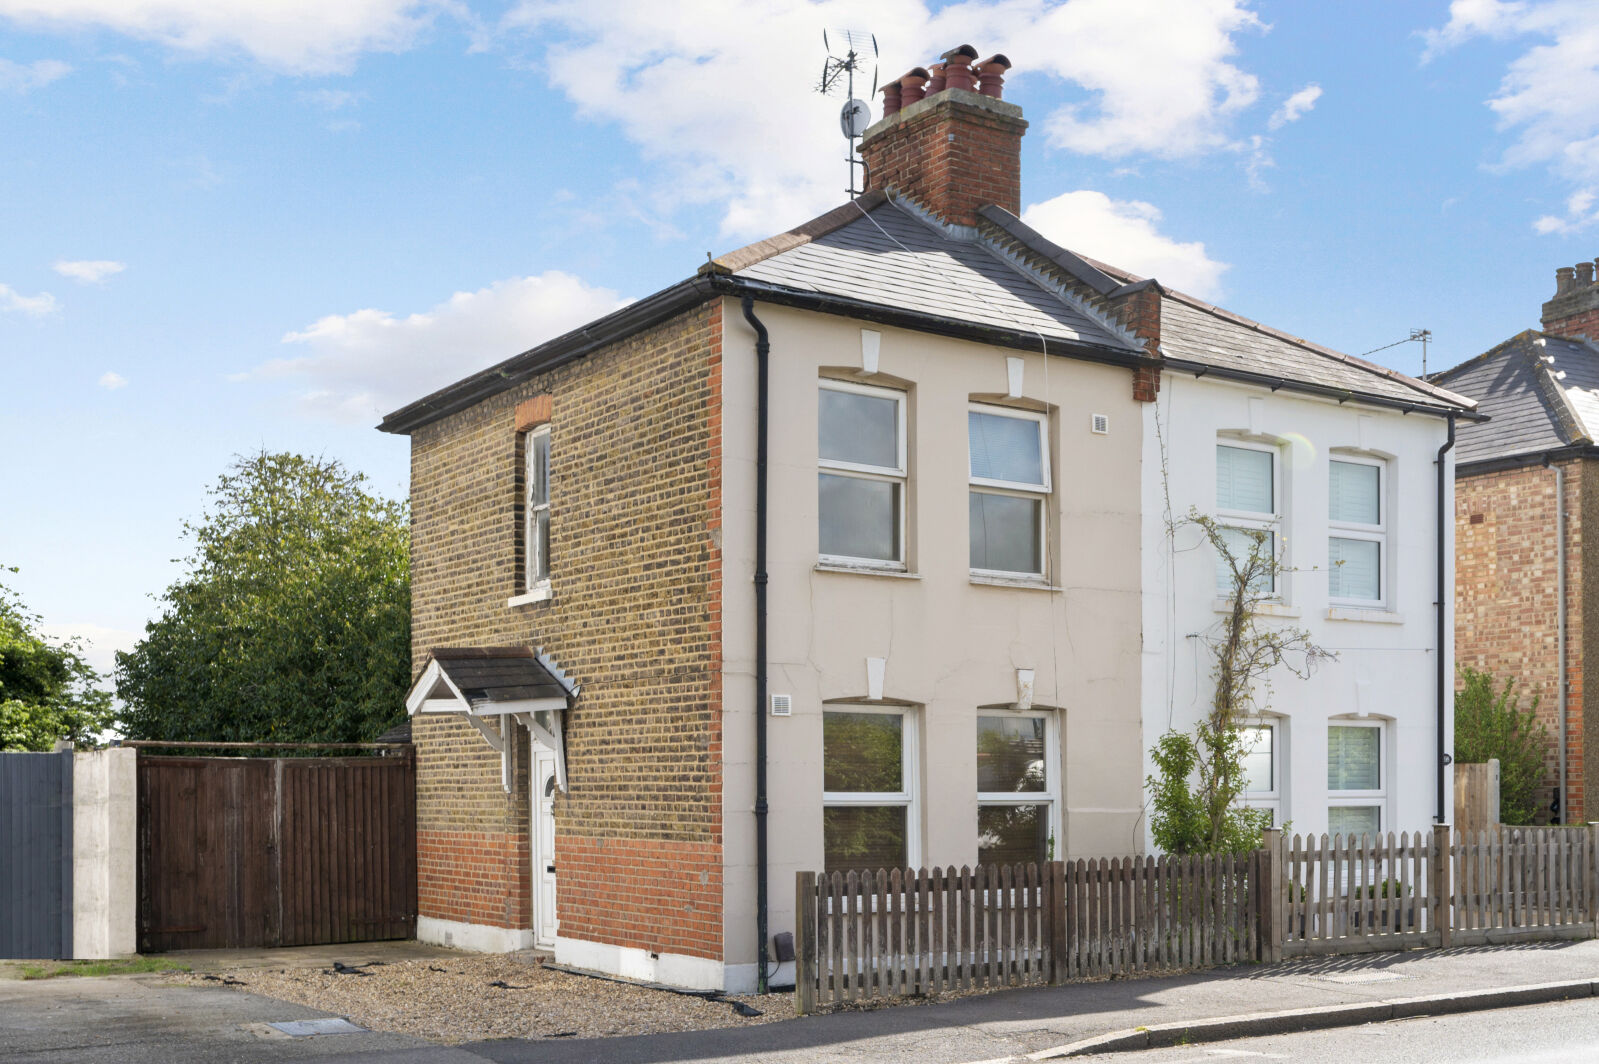 2 bedroom end terraced house for sale Grand Drive, Raynes Park, SW20, main image